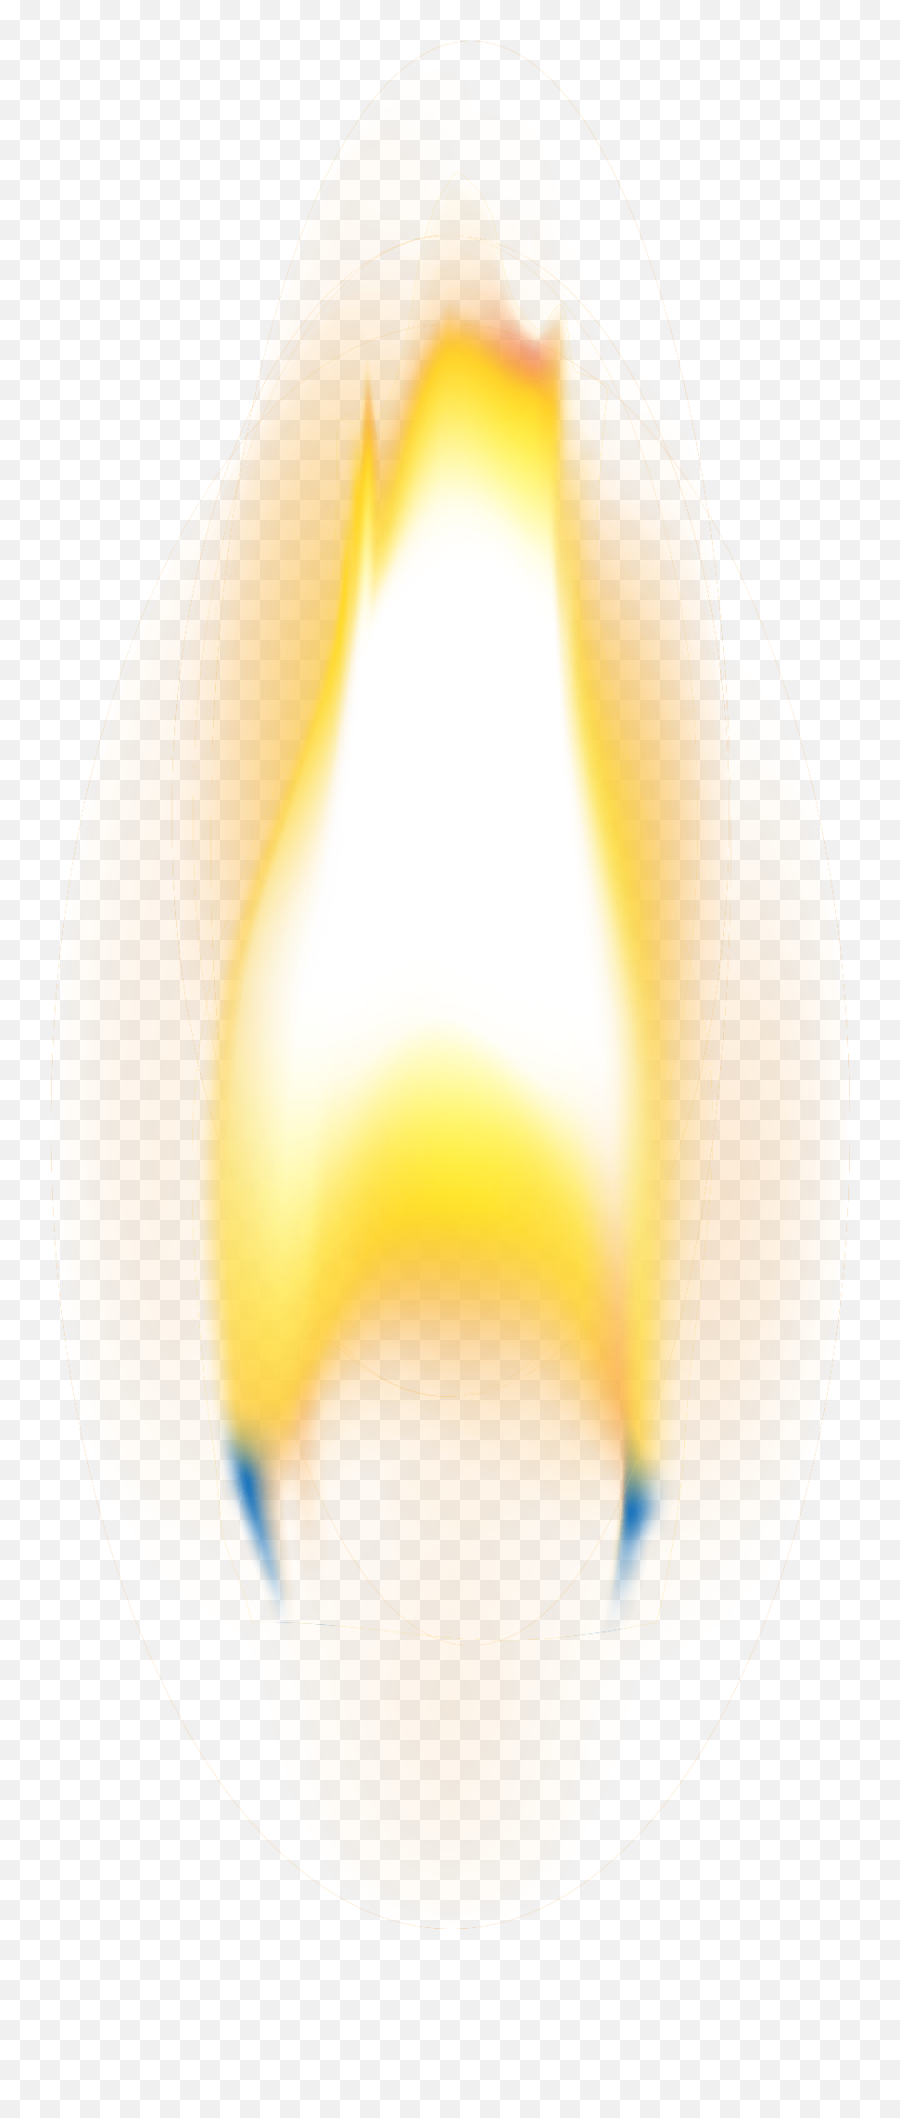 Birthday Candles Flames Png Picture - Candle Flame Png Hd,Lighter Flame Png